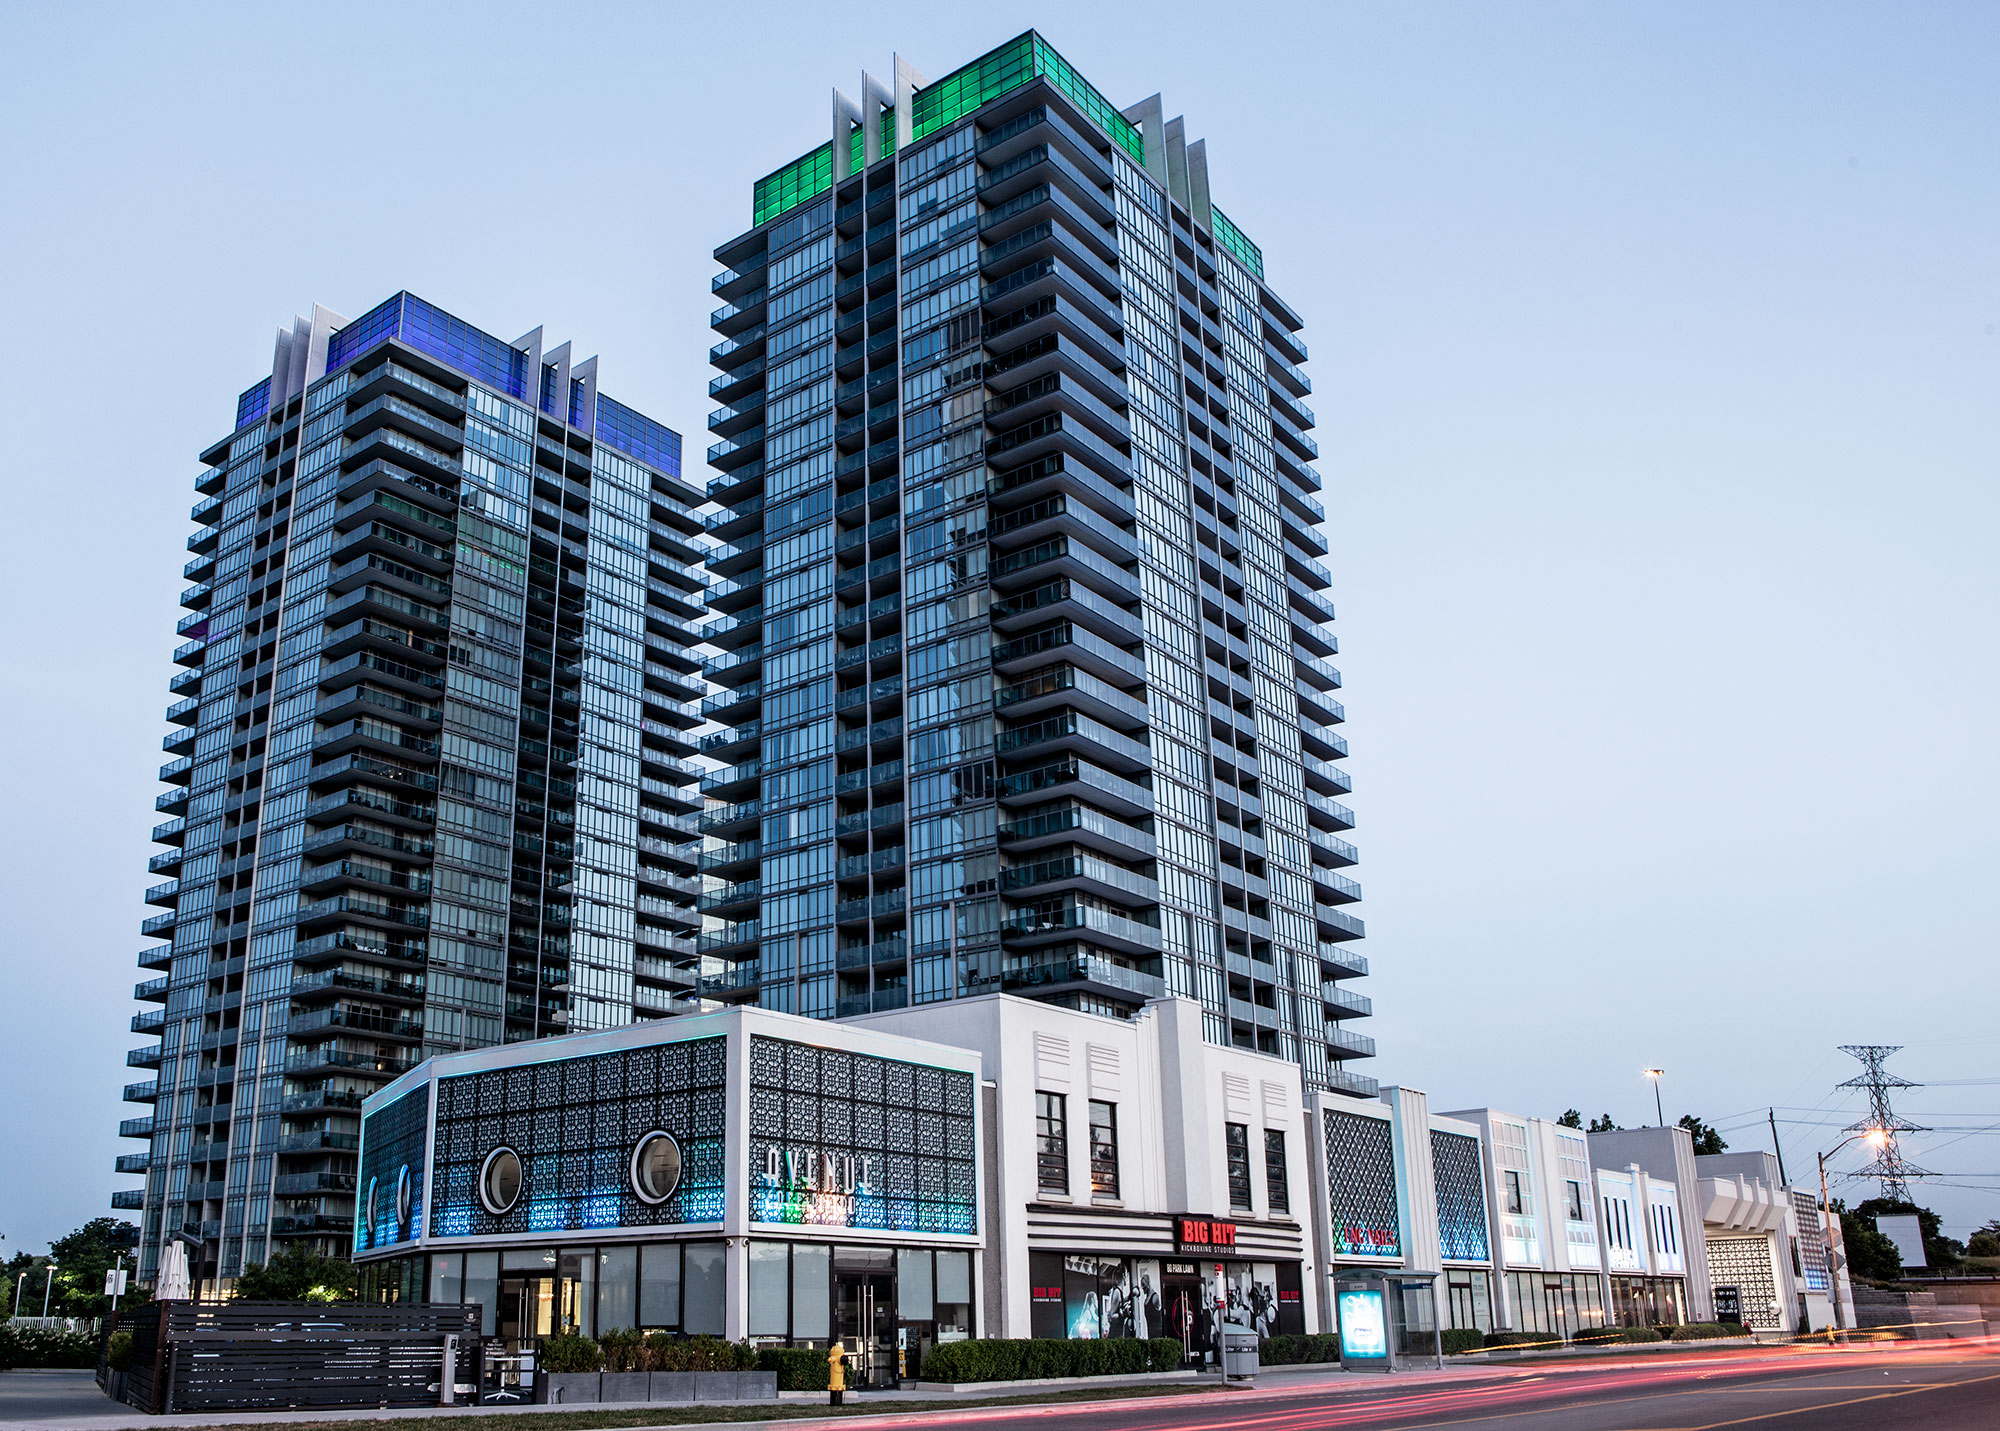 Two 27 storey condominiums, 616 suites with 3 levels of underground parking.